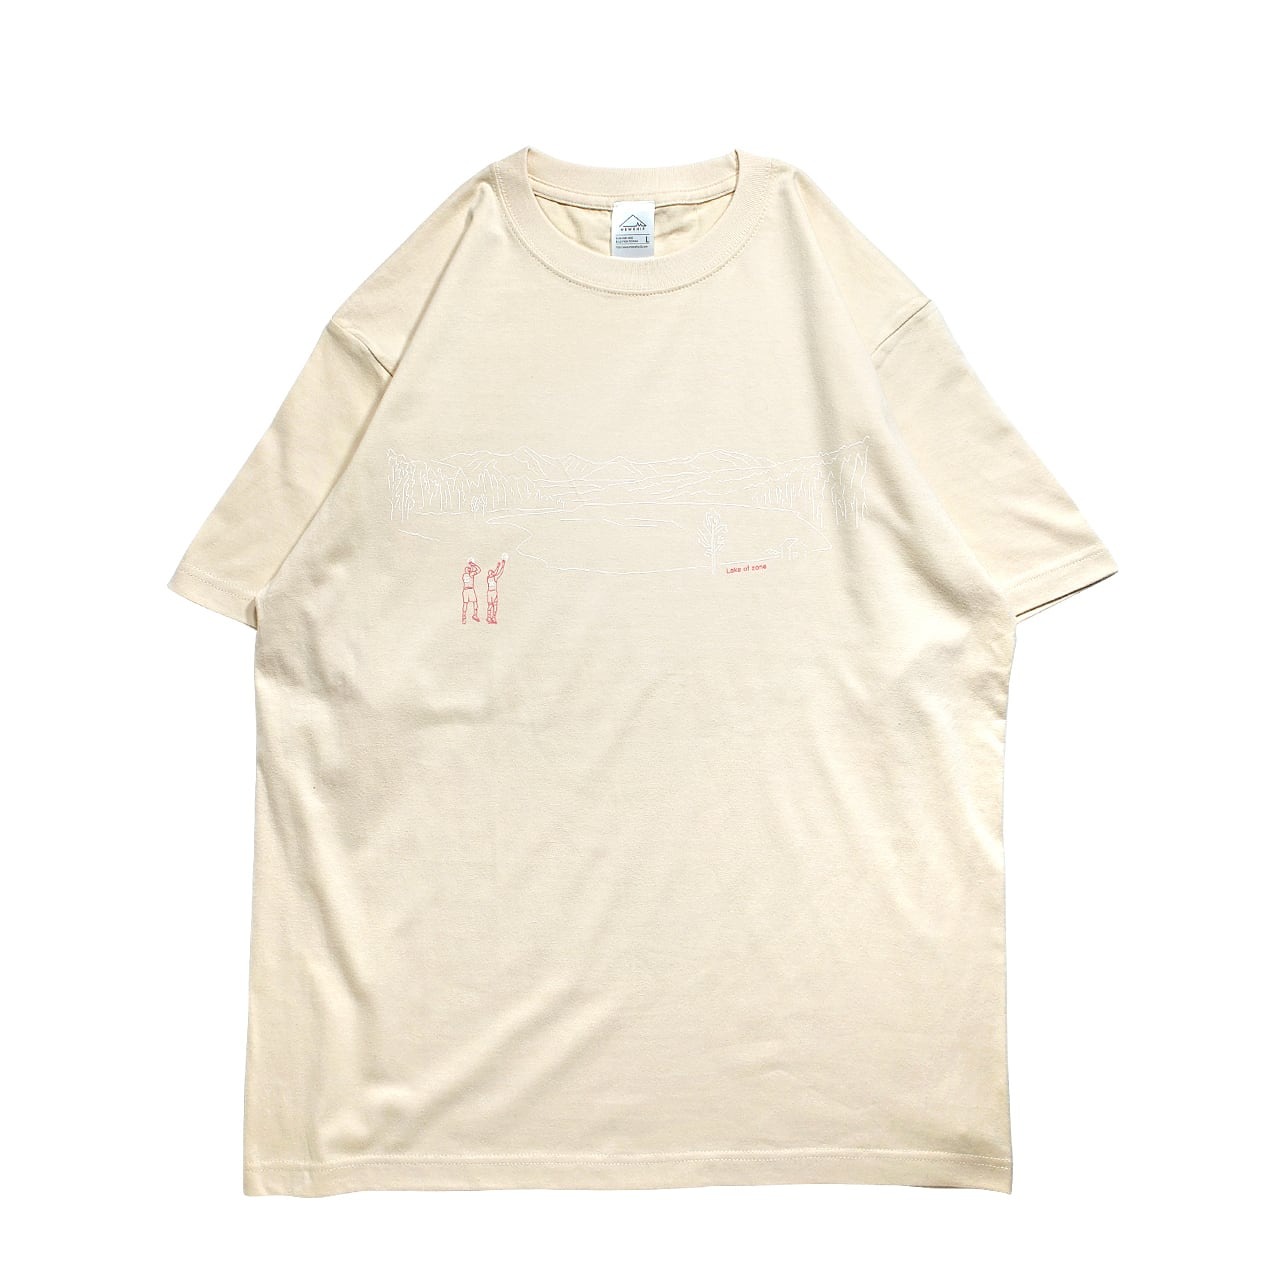 MEWSHIP Lake of zone  S/S CT <L.Beige×S.Pink>